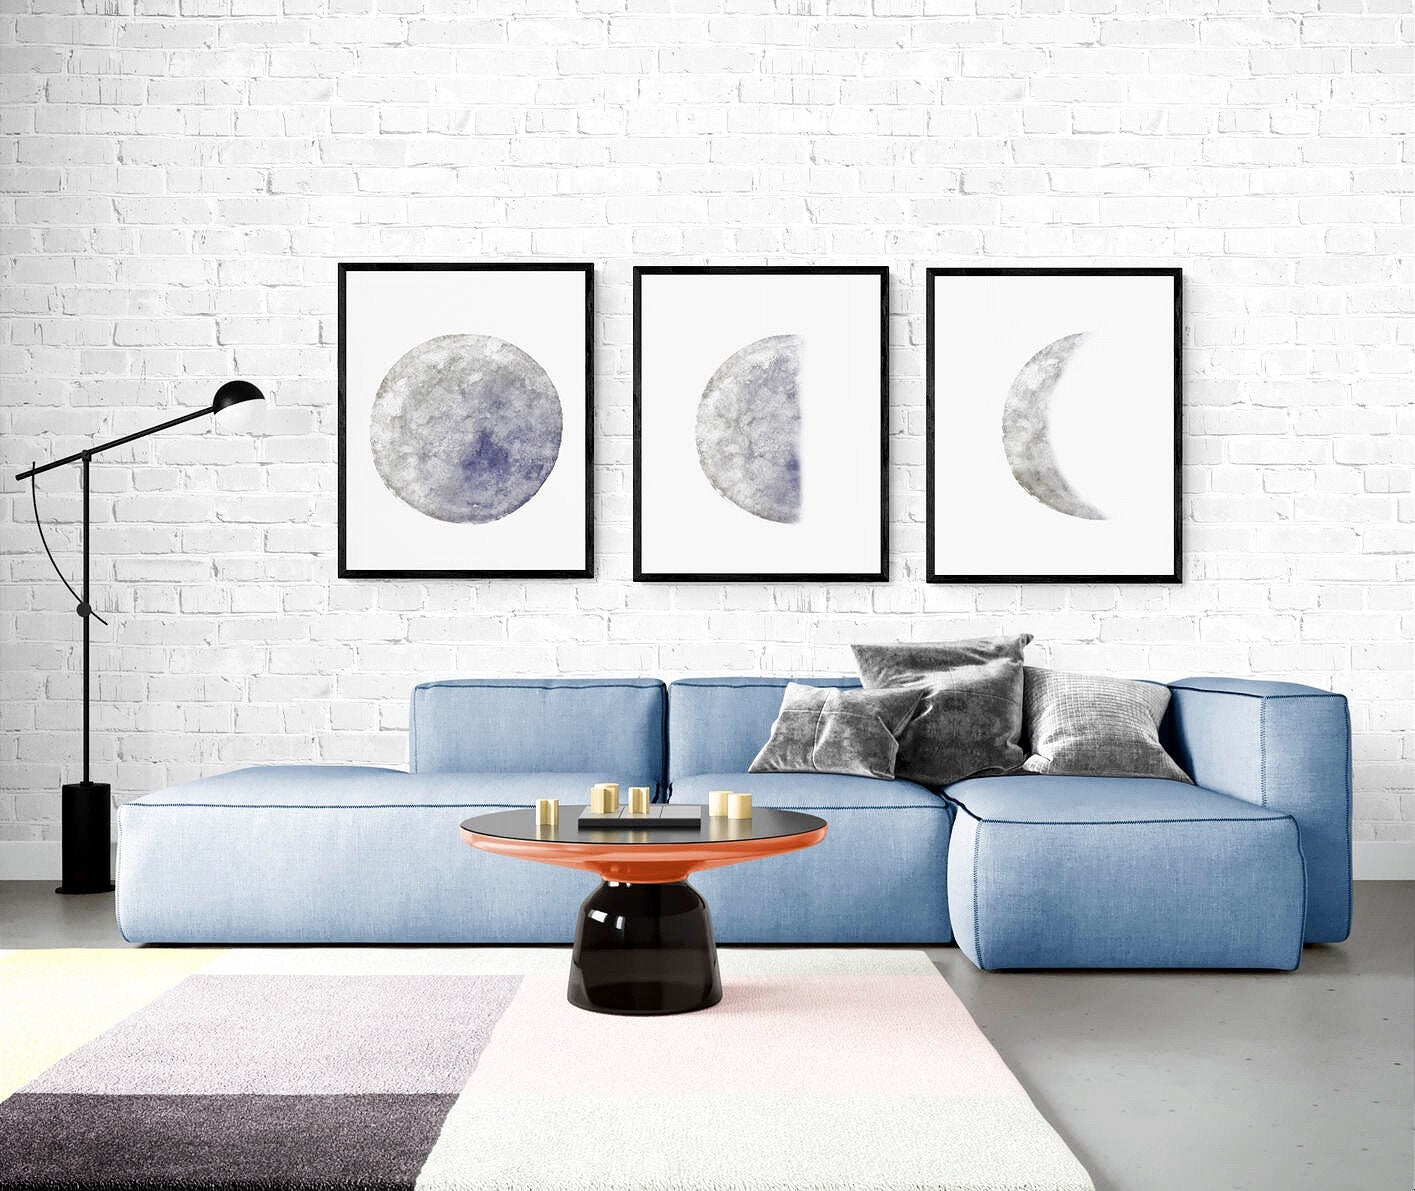 Moon Phases Set of 3 Prints, Gray Moon Poster, Galaxy Artwork, Home Wall Decor, Modern Wall Art, Bedroom Wall Decor, Lunar phase, Space Art